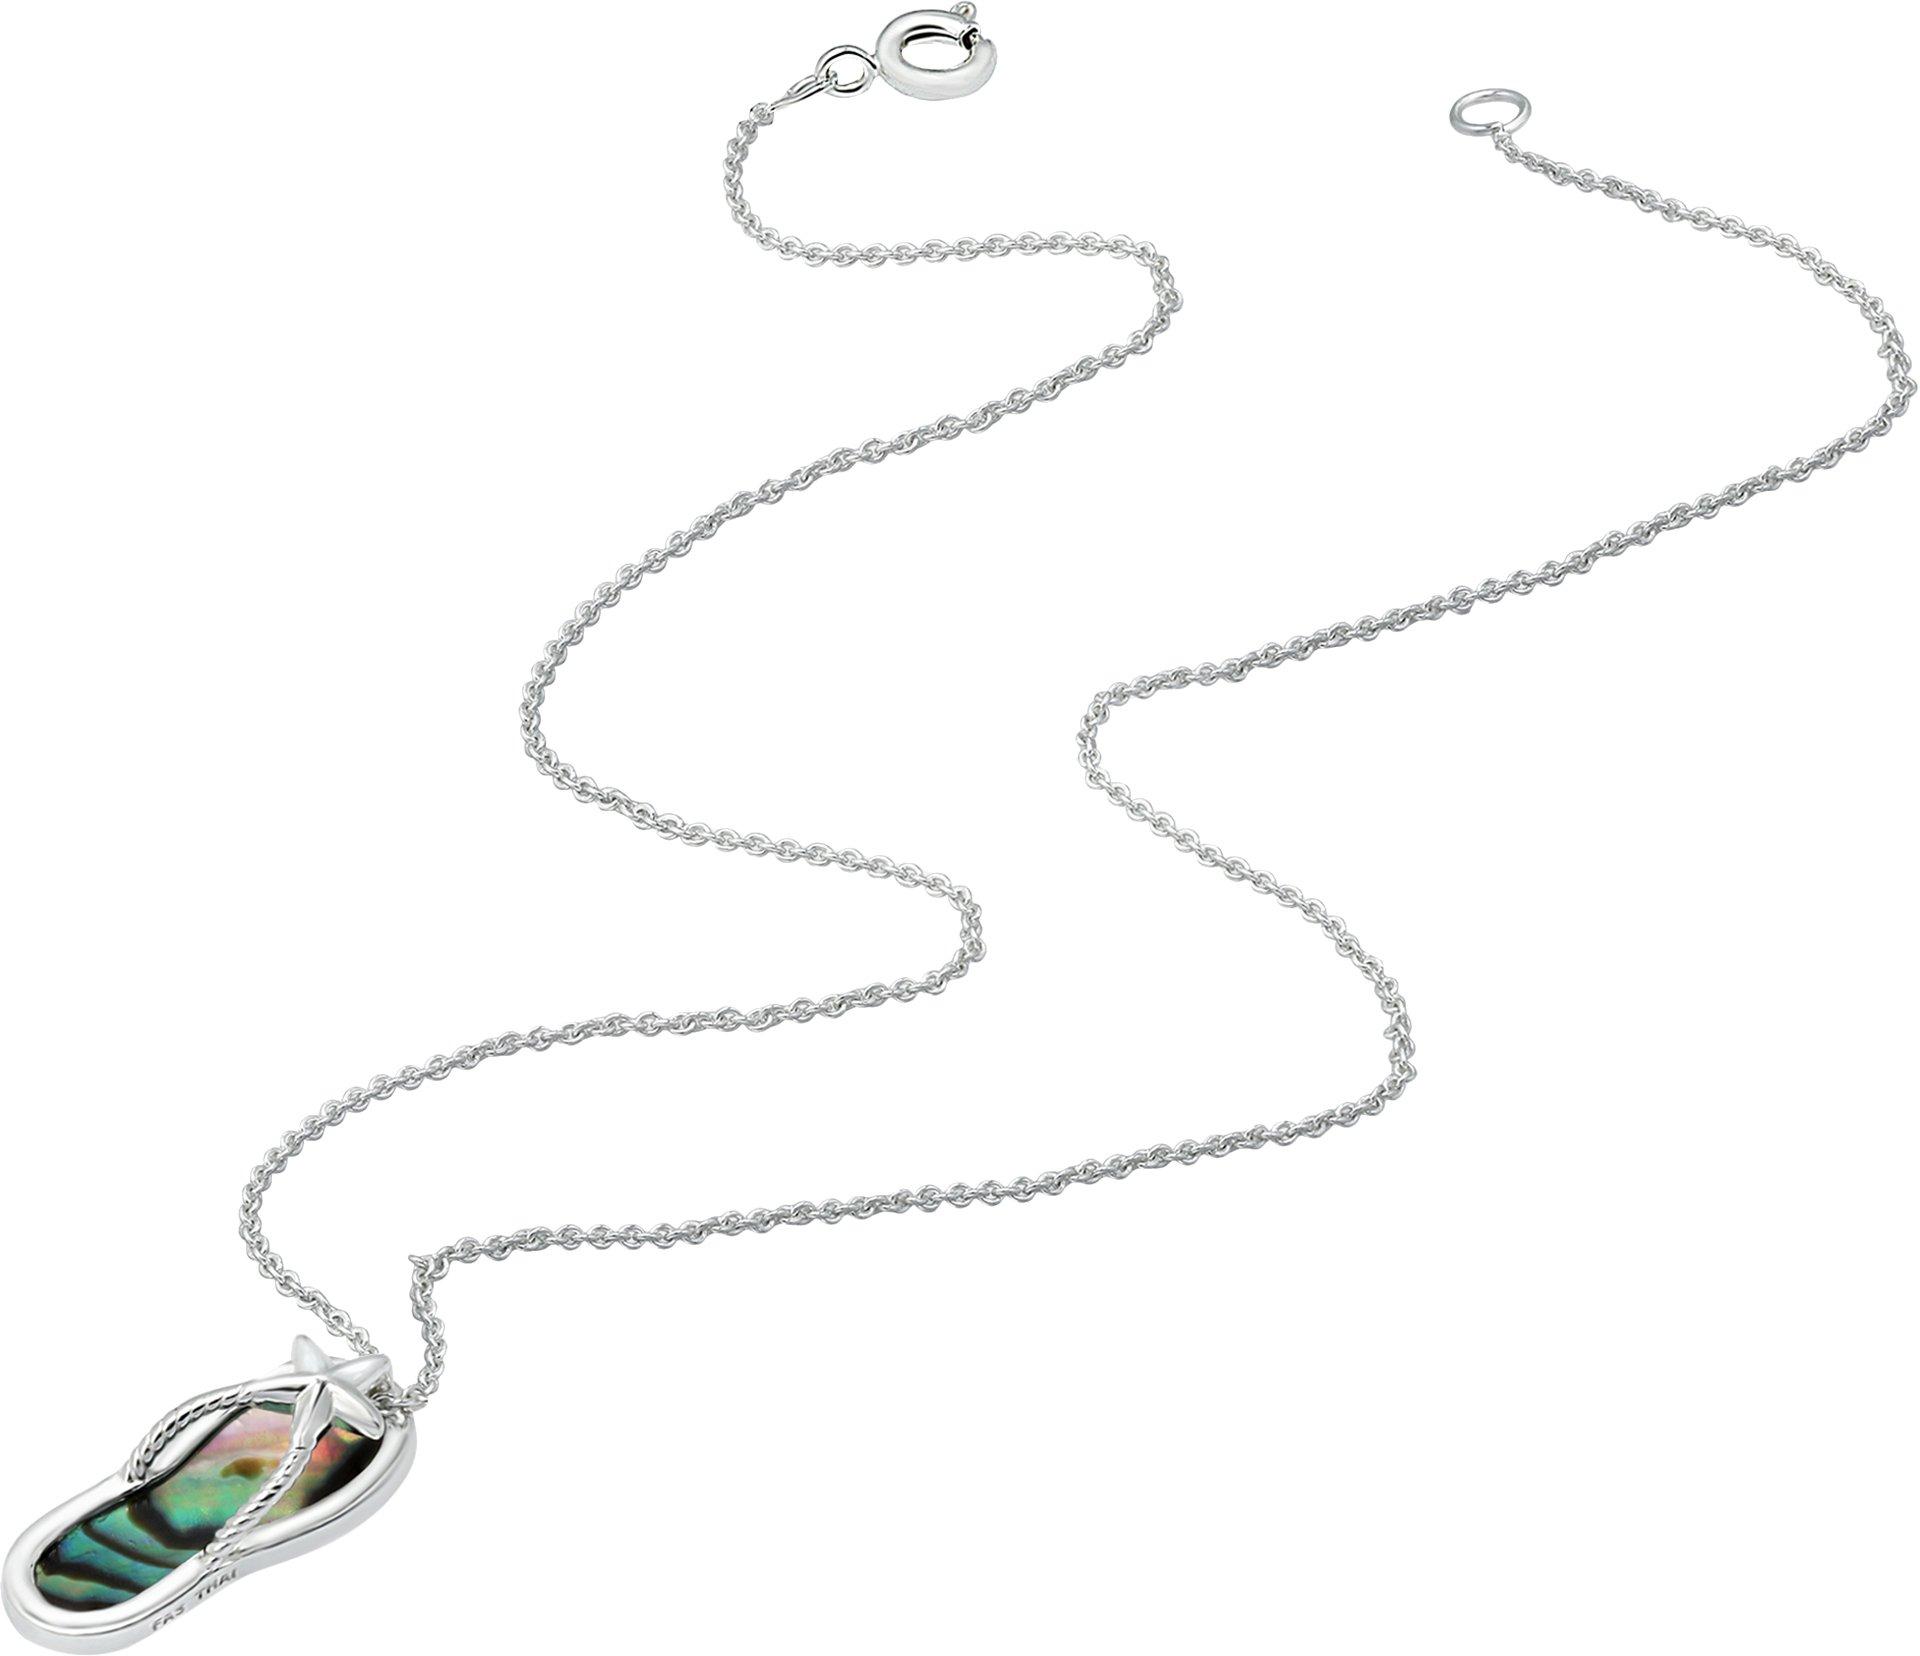 Silver Plated Abalone Flip Flop Necklace